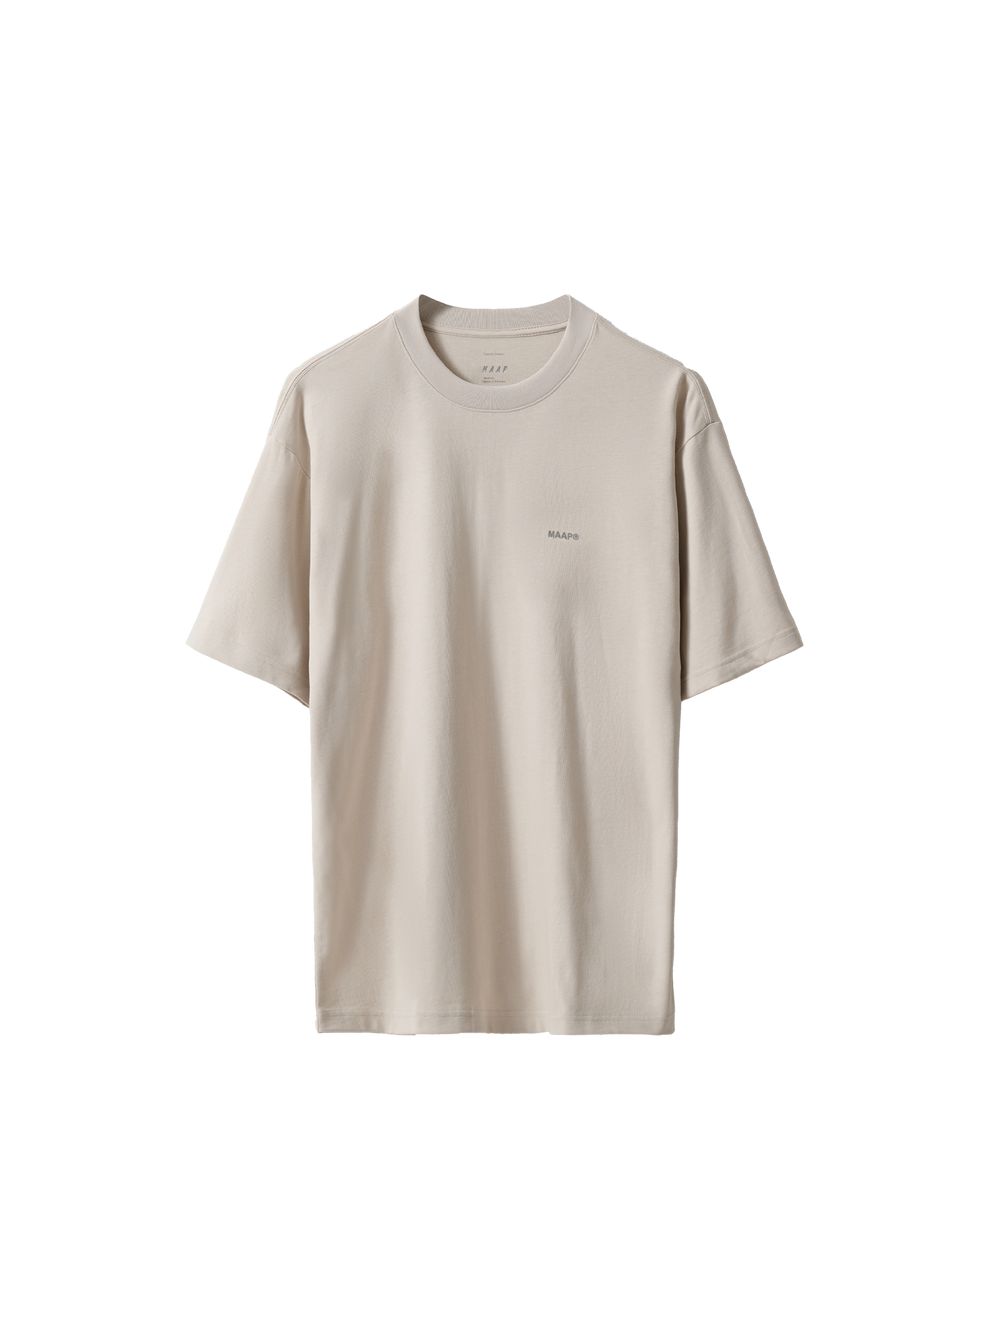 Product Image for Essentials Tee